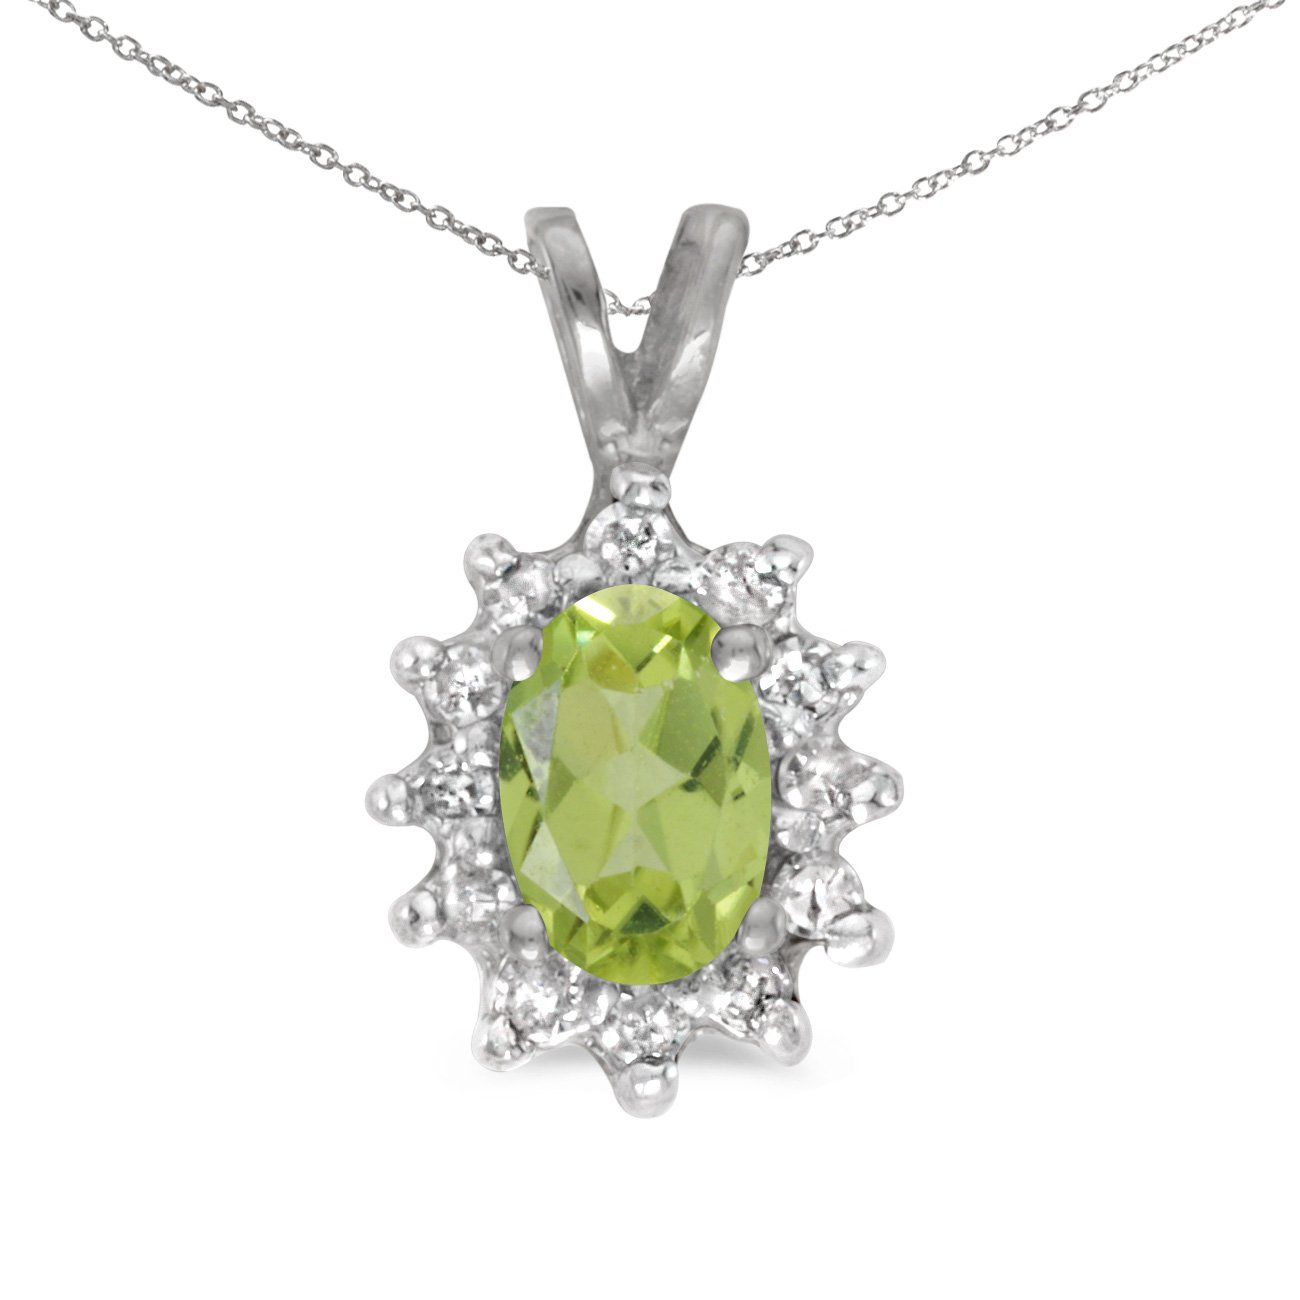 This 14k white gold oval peridot and diamond pendant features a 6x4 mm genuine natural peridot wi...